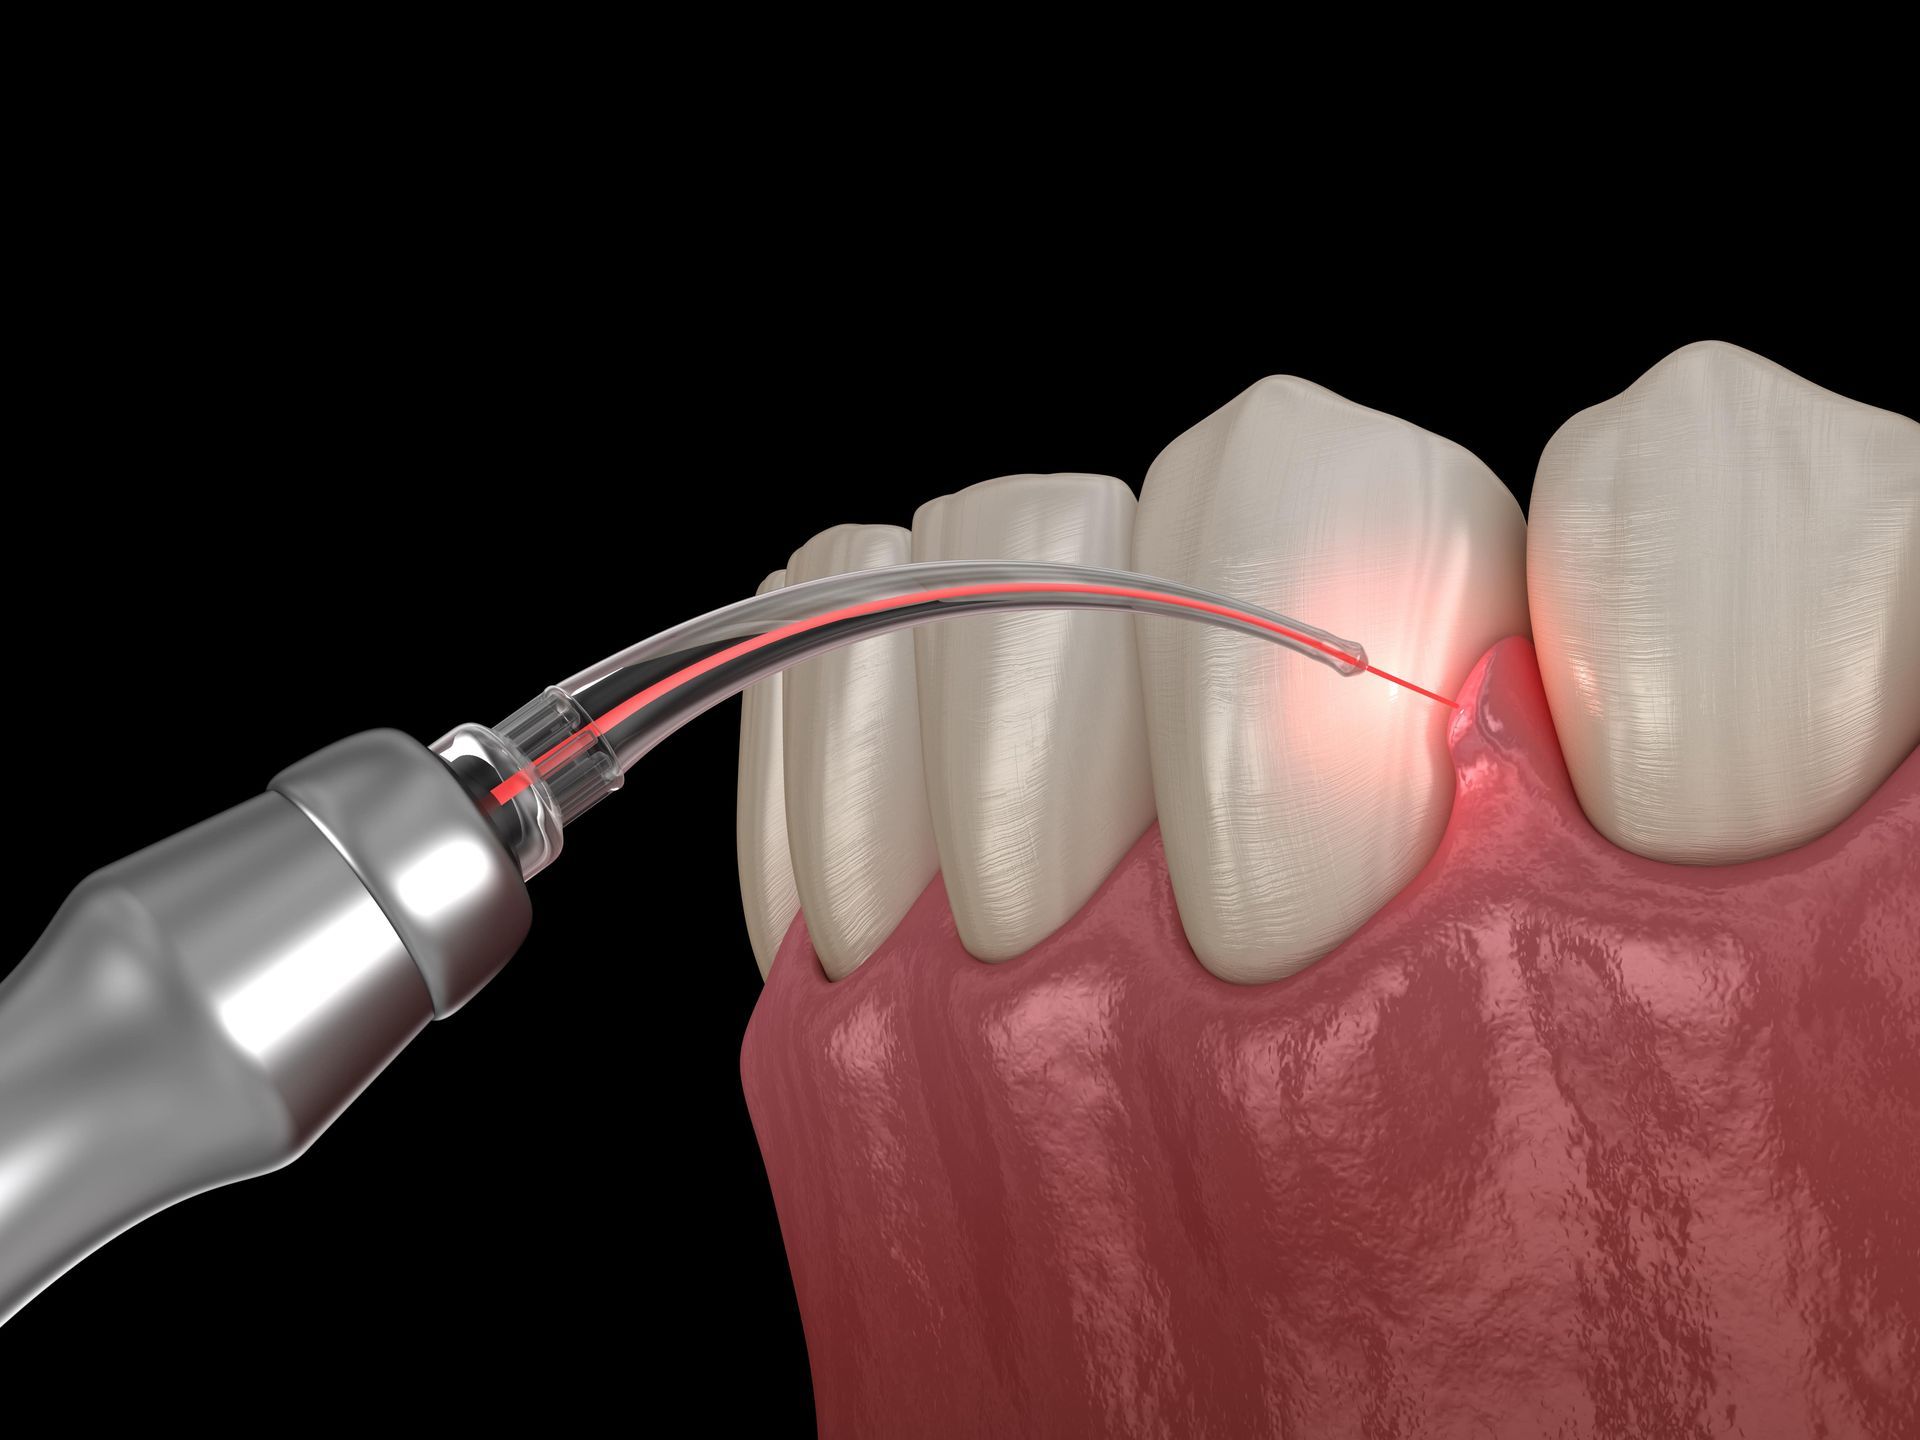 Why Laser Dentistry? The Game-Changer in Modern Dental Care